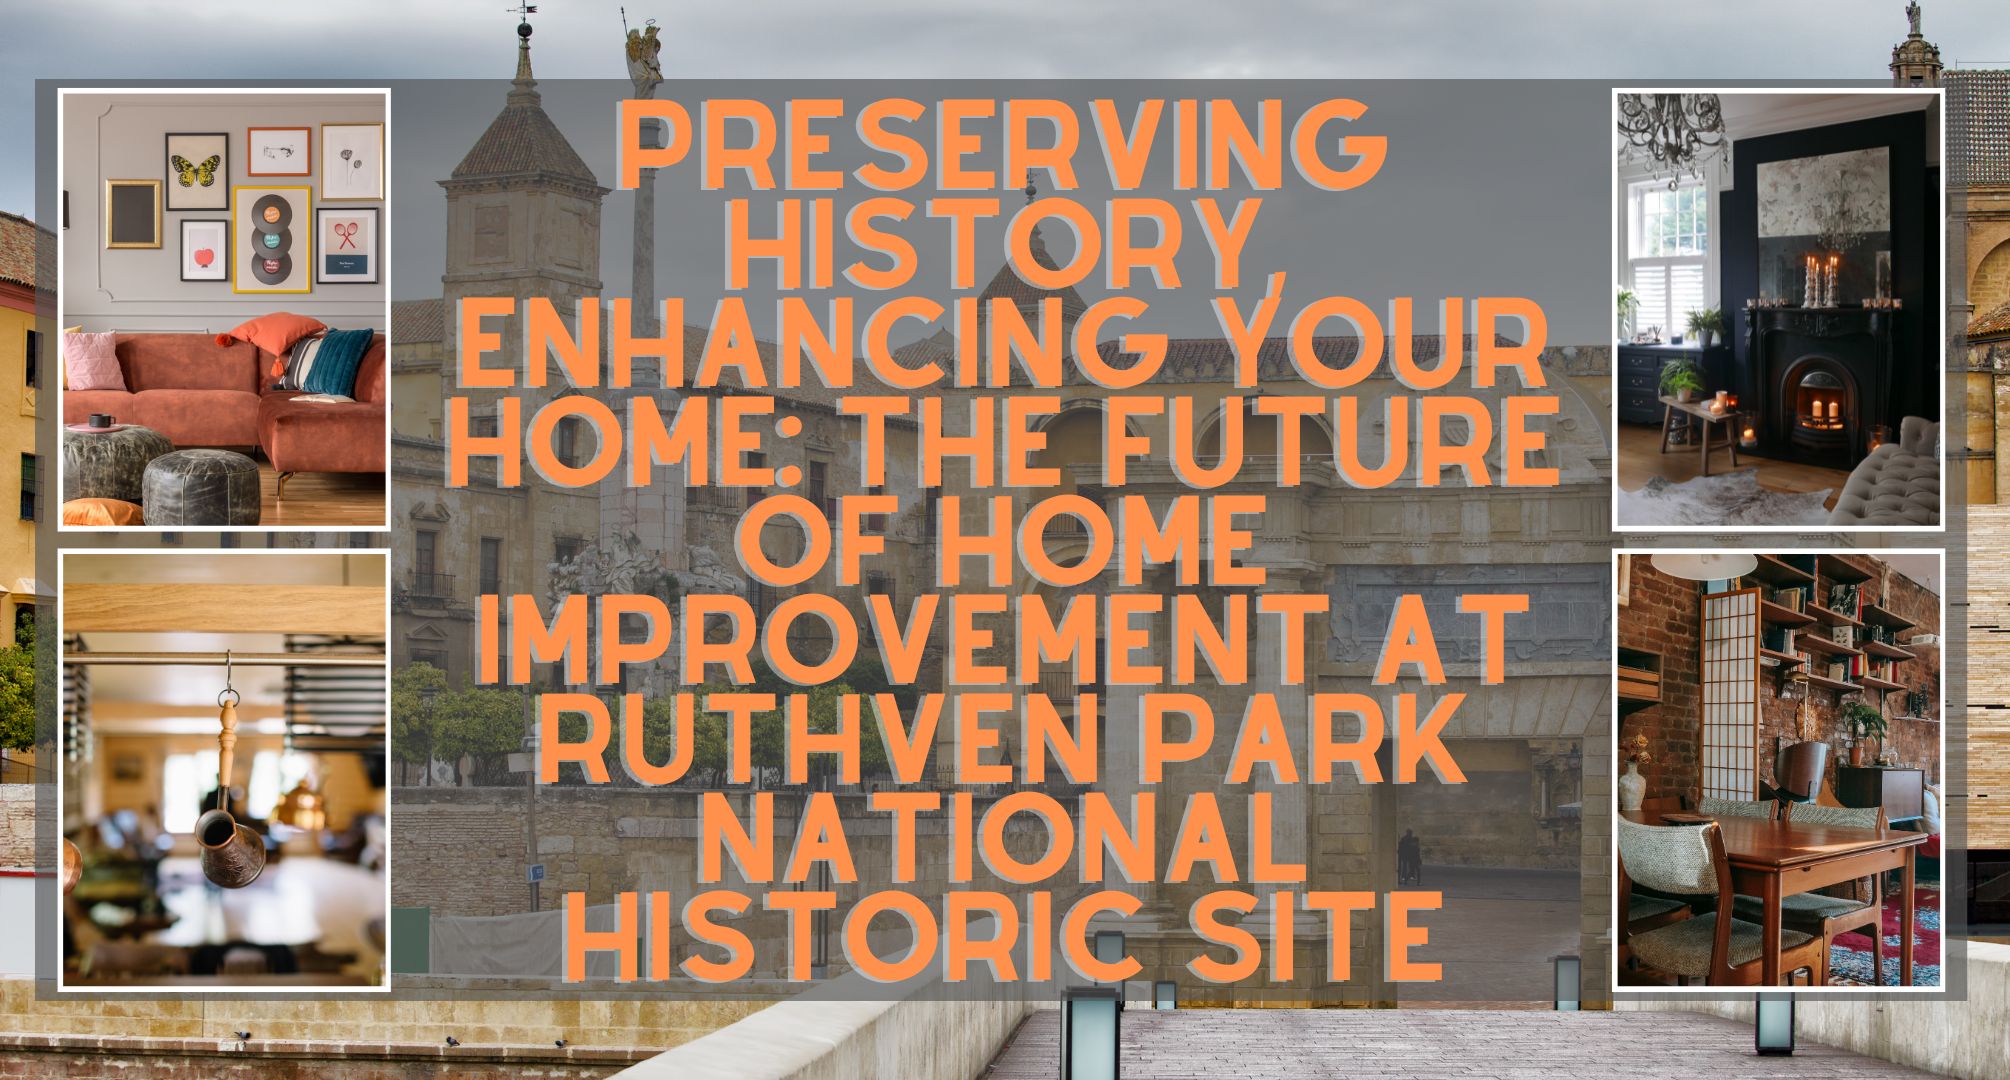 Preserving History, Enhancing Your Home The Future of Home Improvement at Ruthven Park National Historic Site